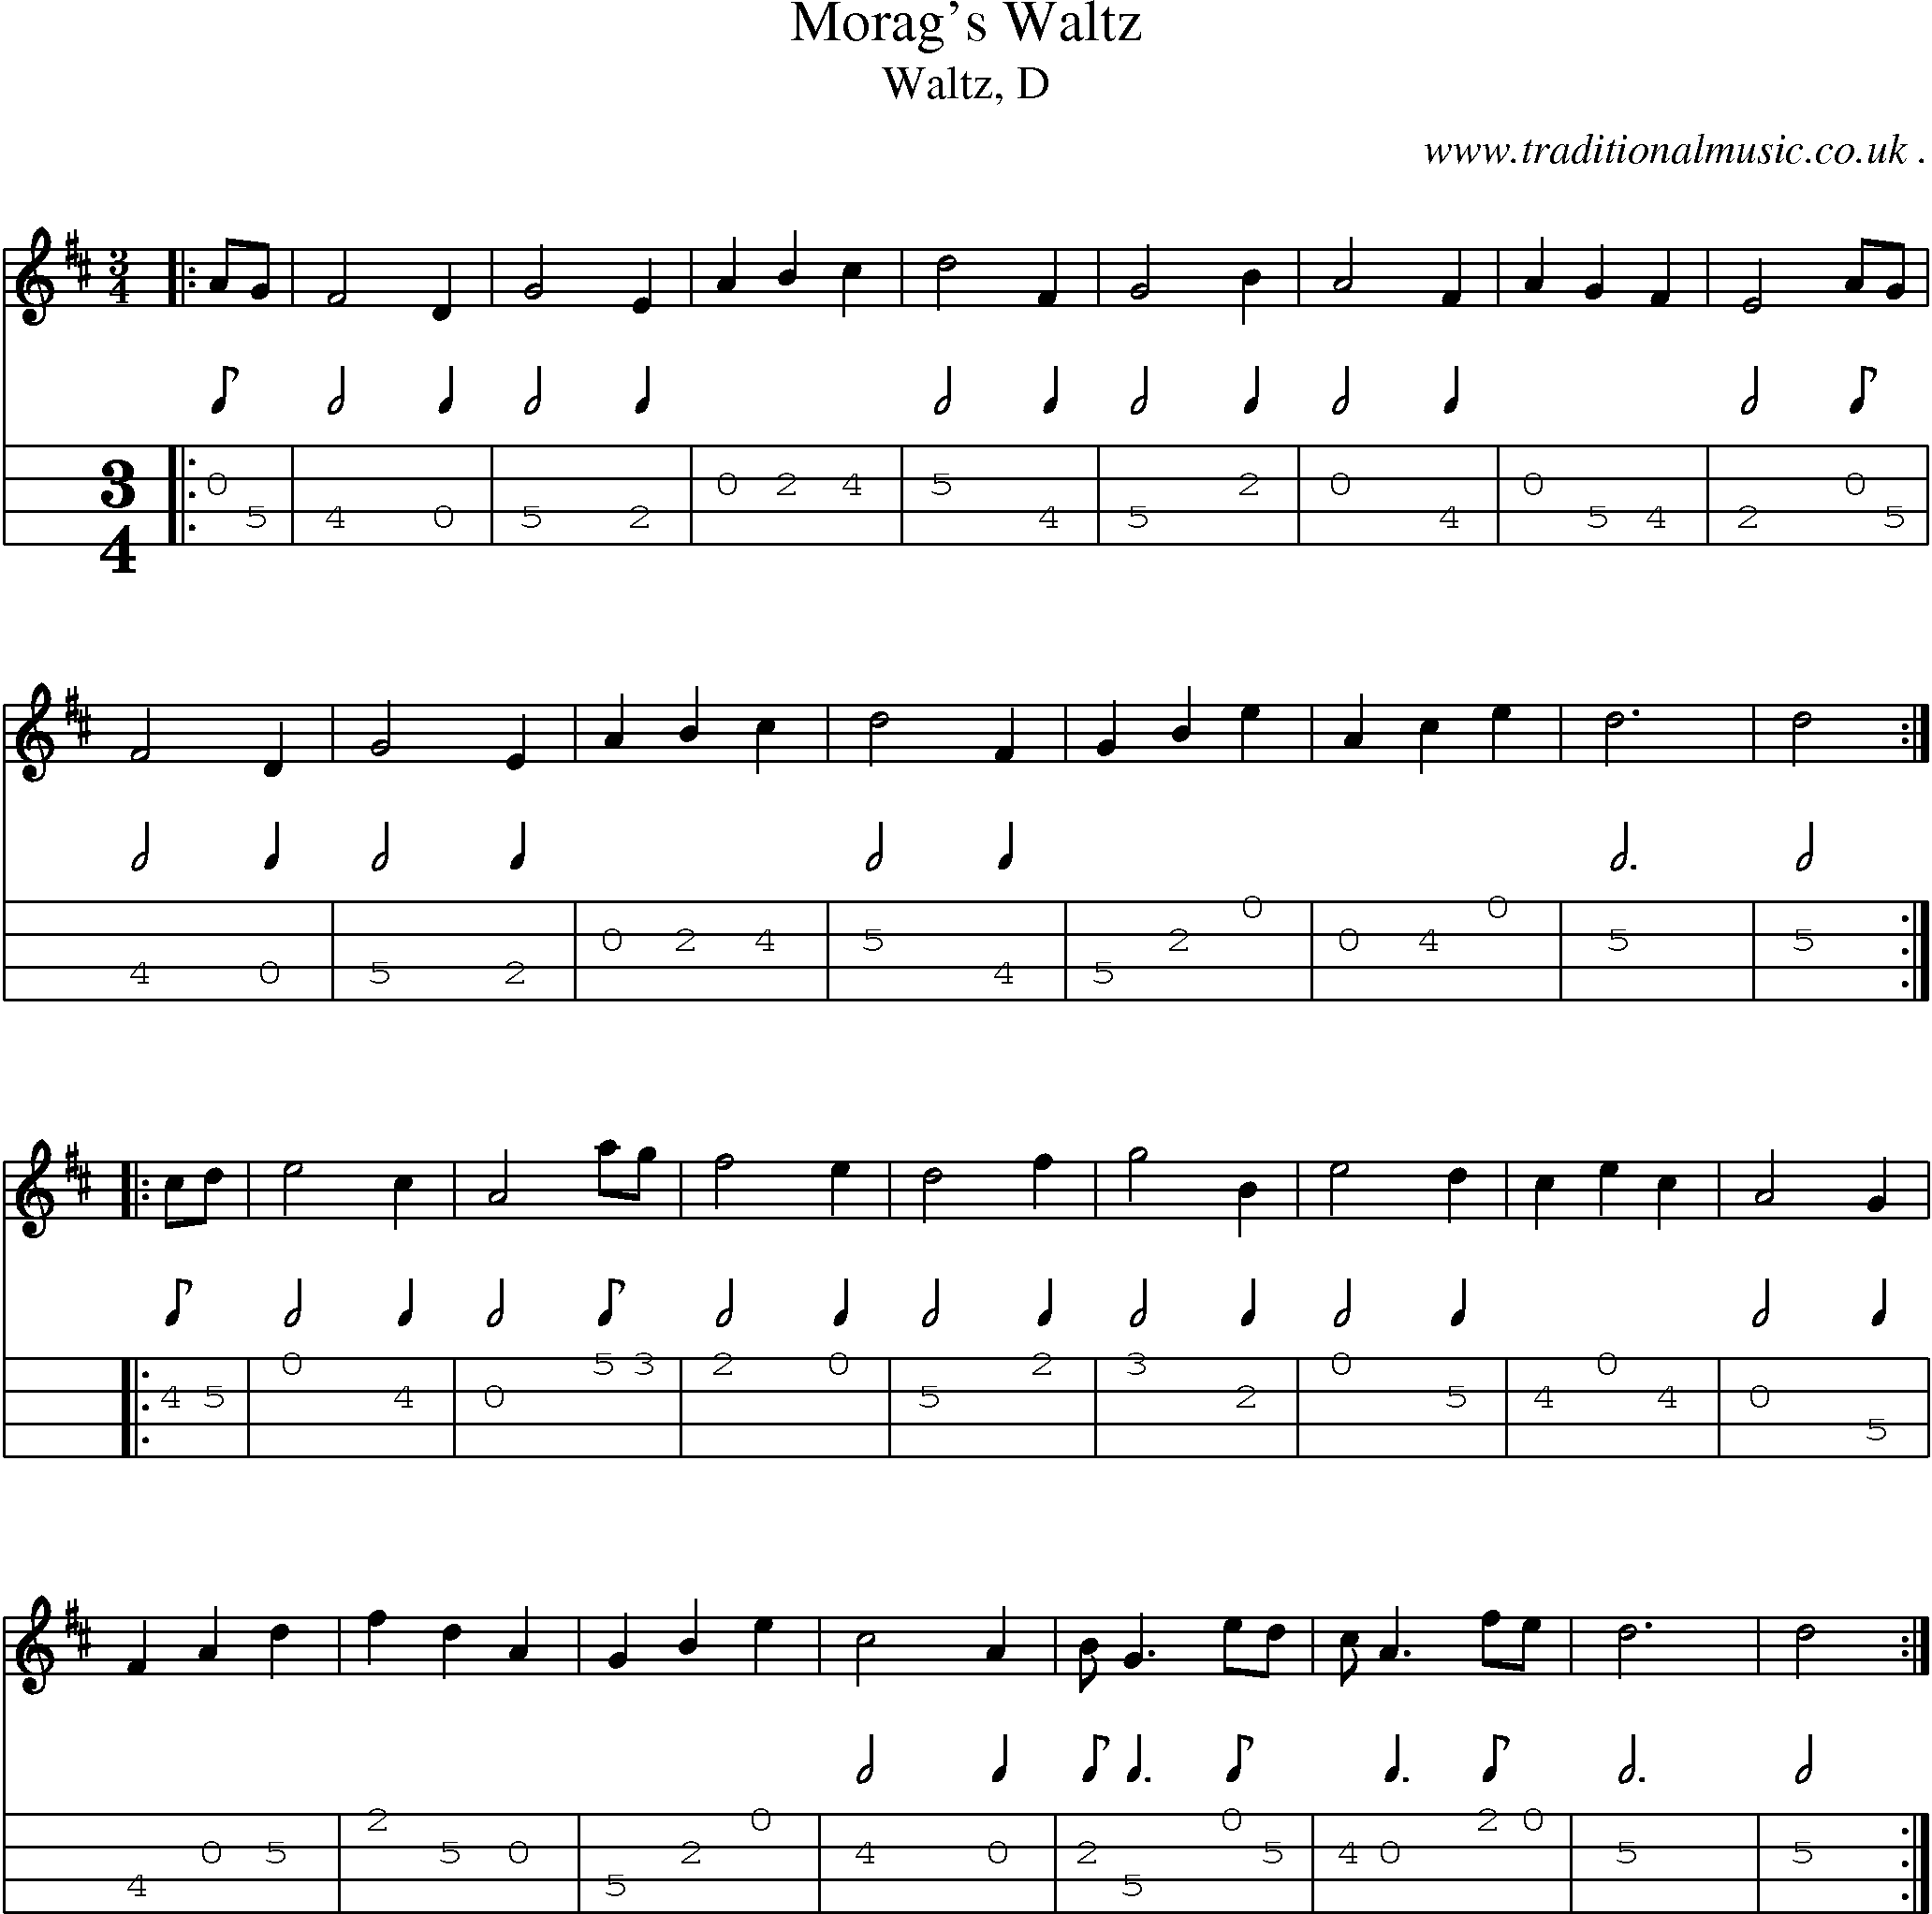 Sheet-music  score, Chords and Mandolin Tabs for Morags Waltz